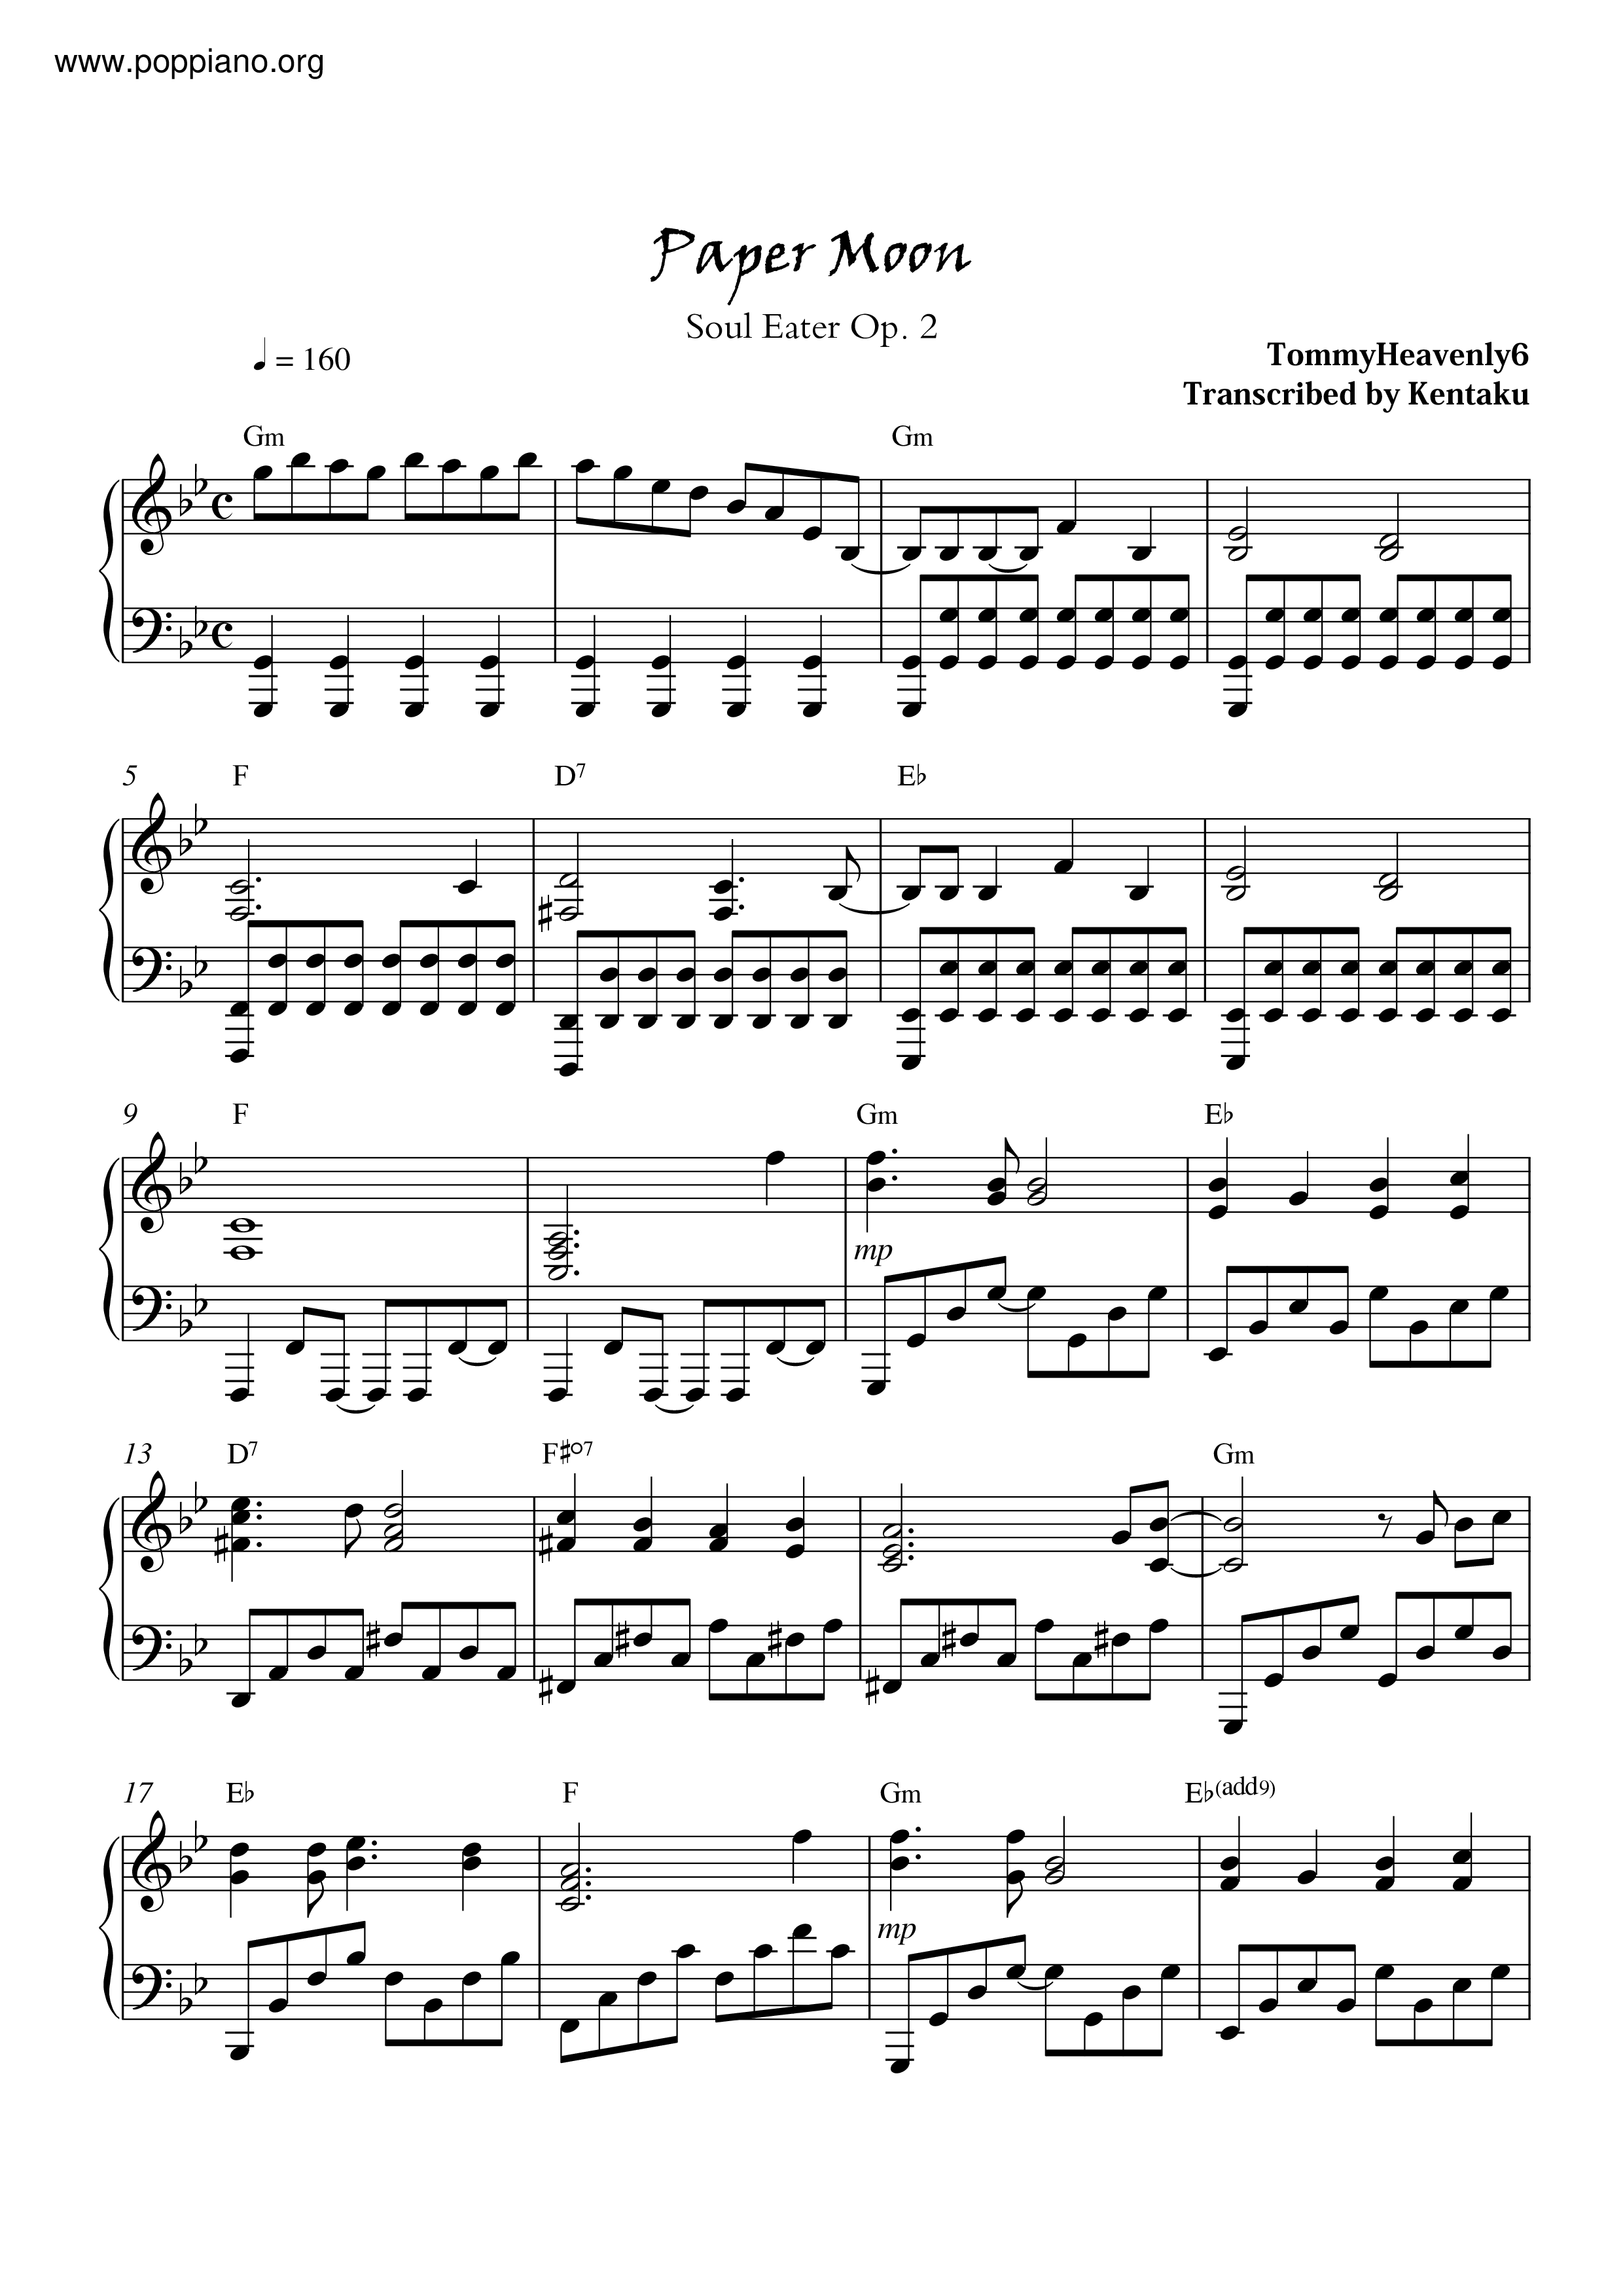 Paper Moon(Soul Eater Opening 2) Sheet music for Piano (Solo)